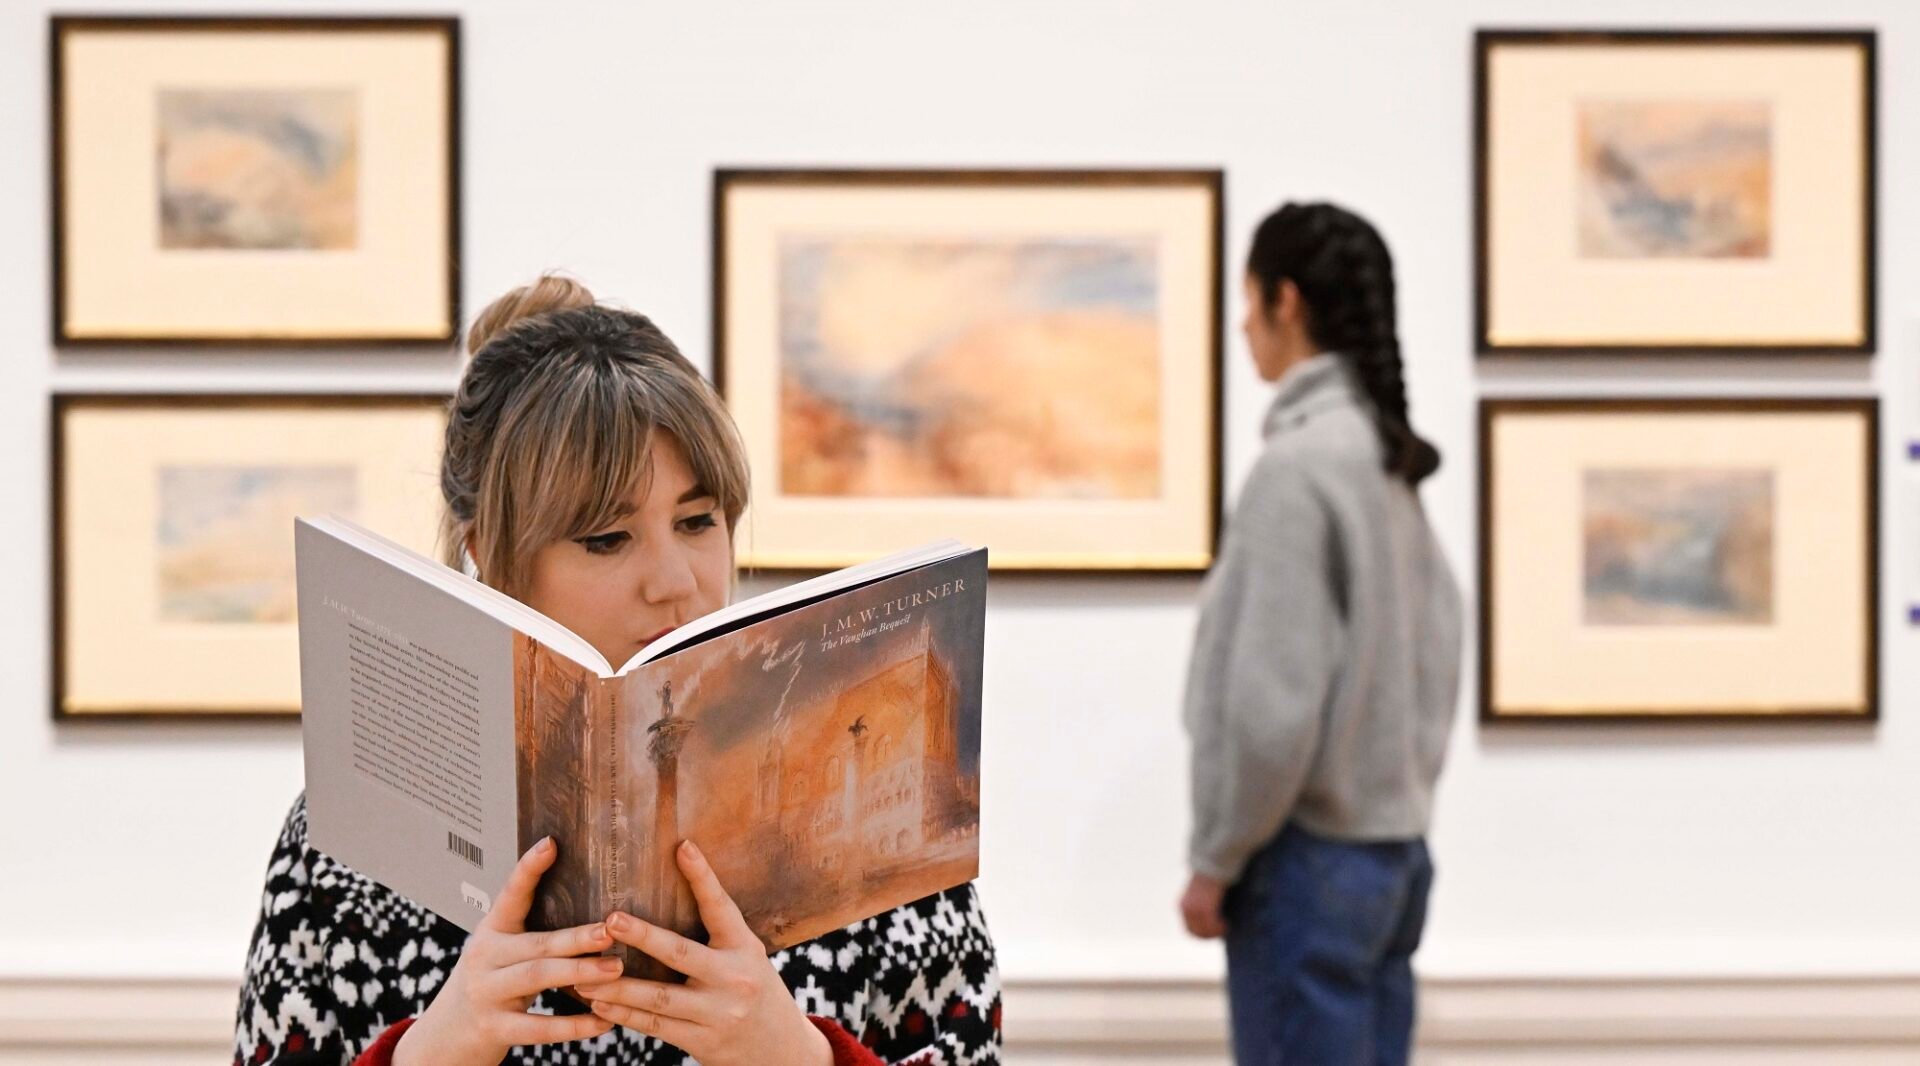 Lady looking at Turner images and Lady reading Turner Guide book at the Turner in January exhibition.